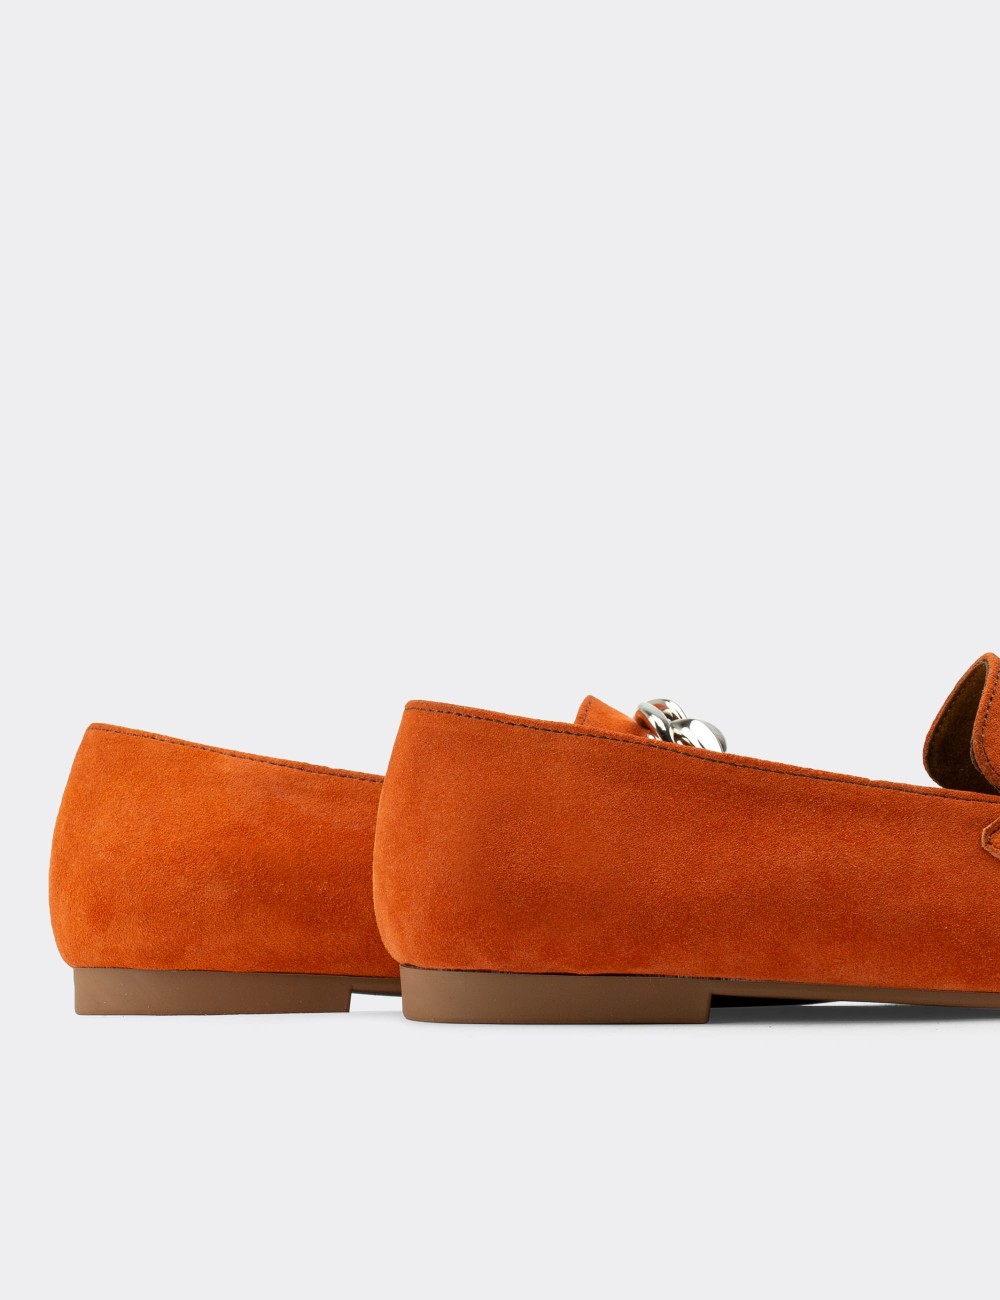 Orange Suede Leather Loafers - 01915ZTRCC01